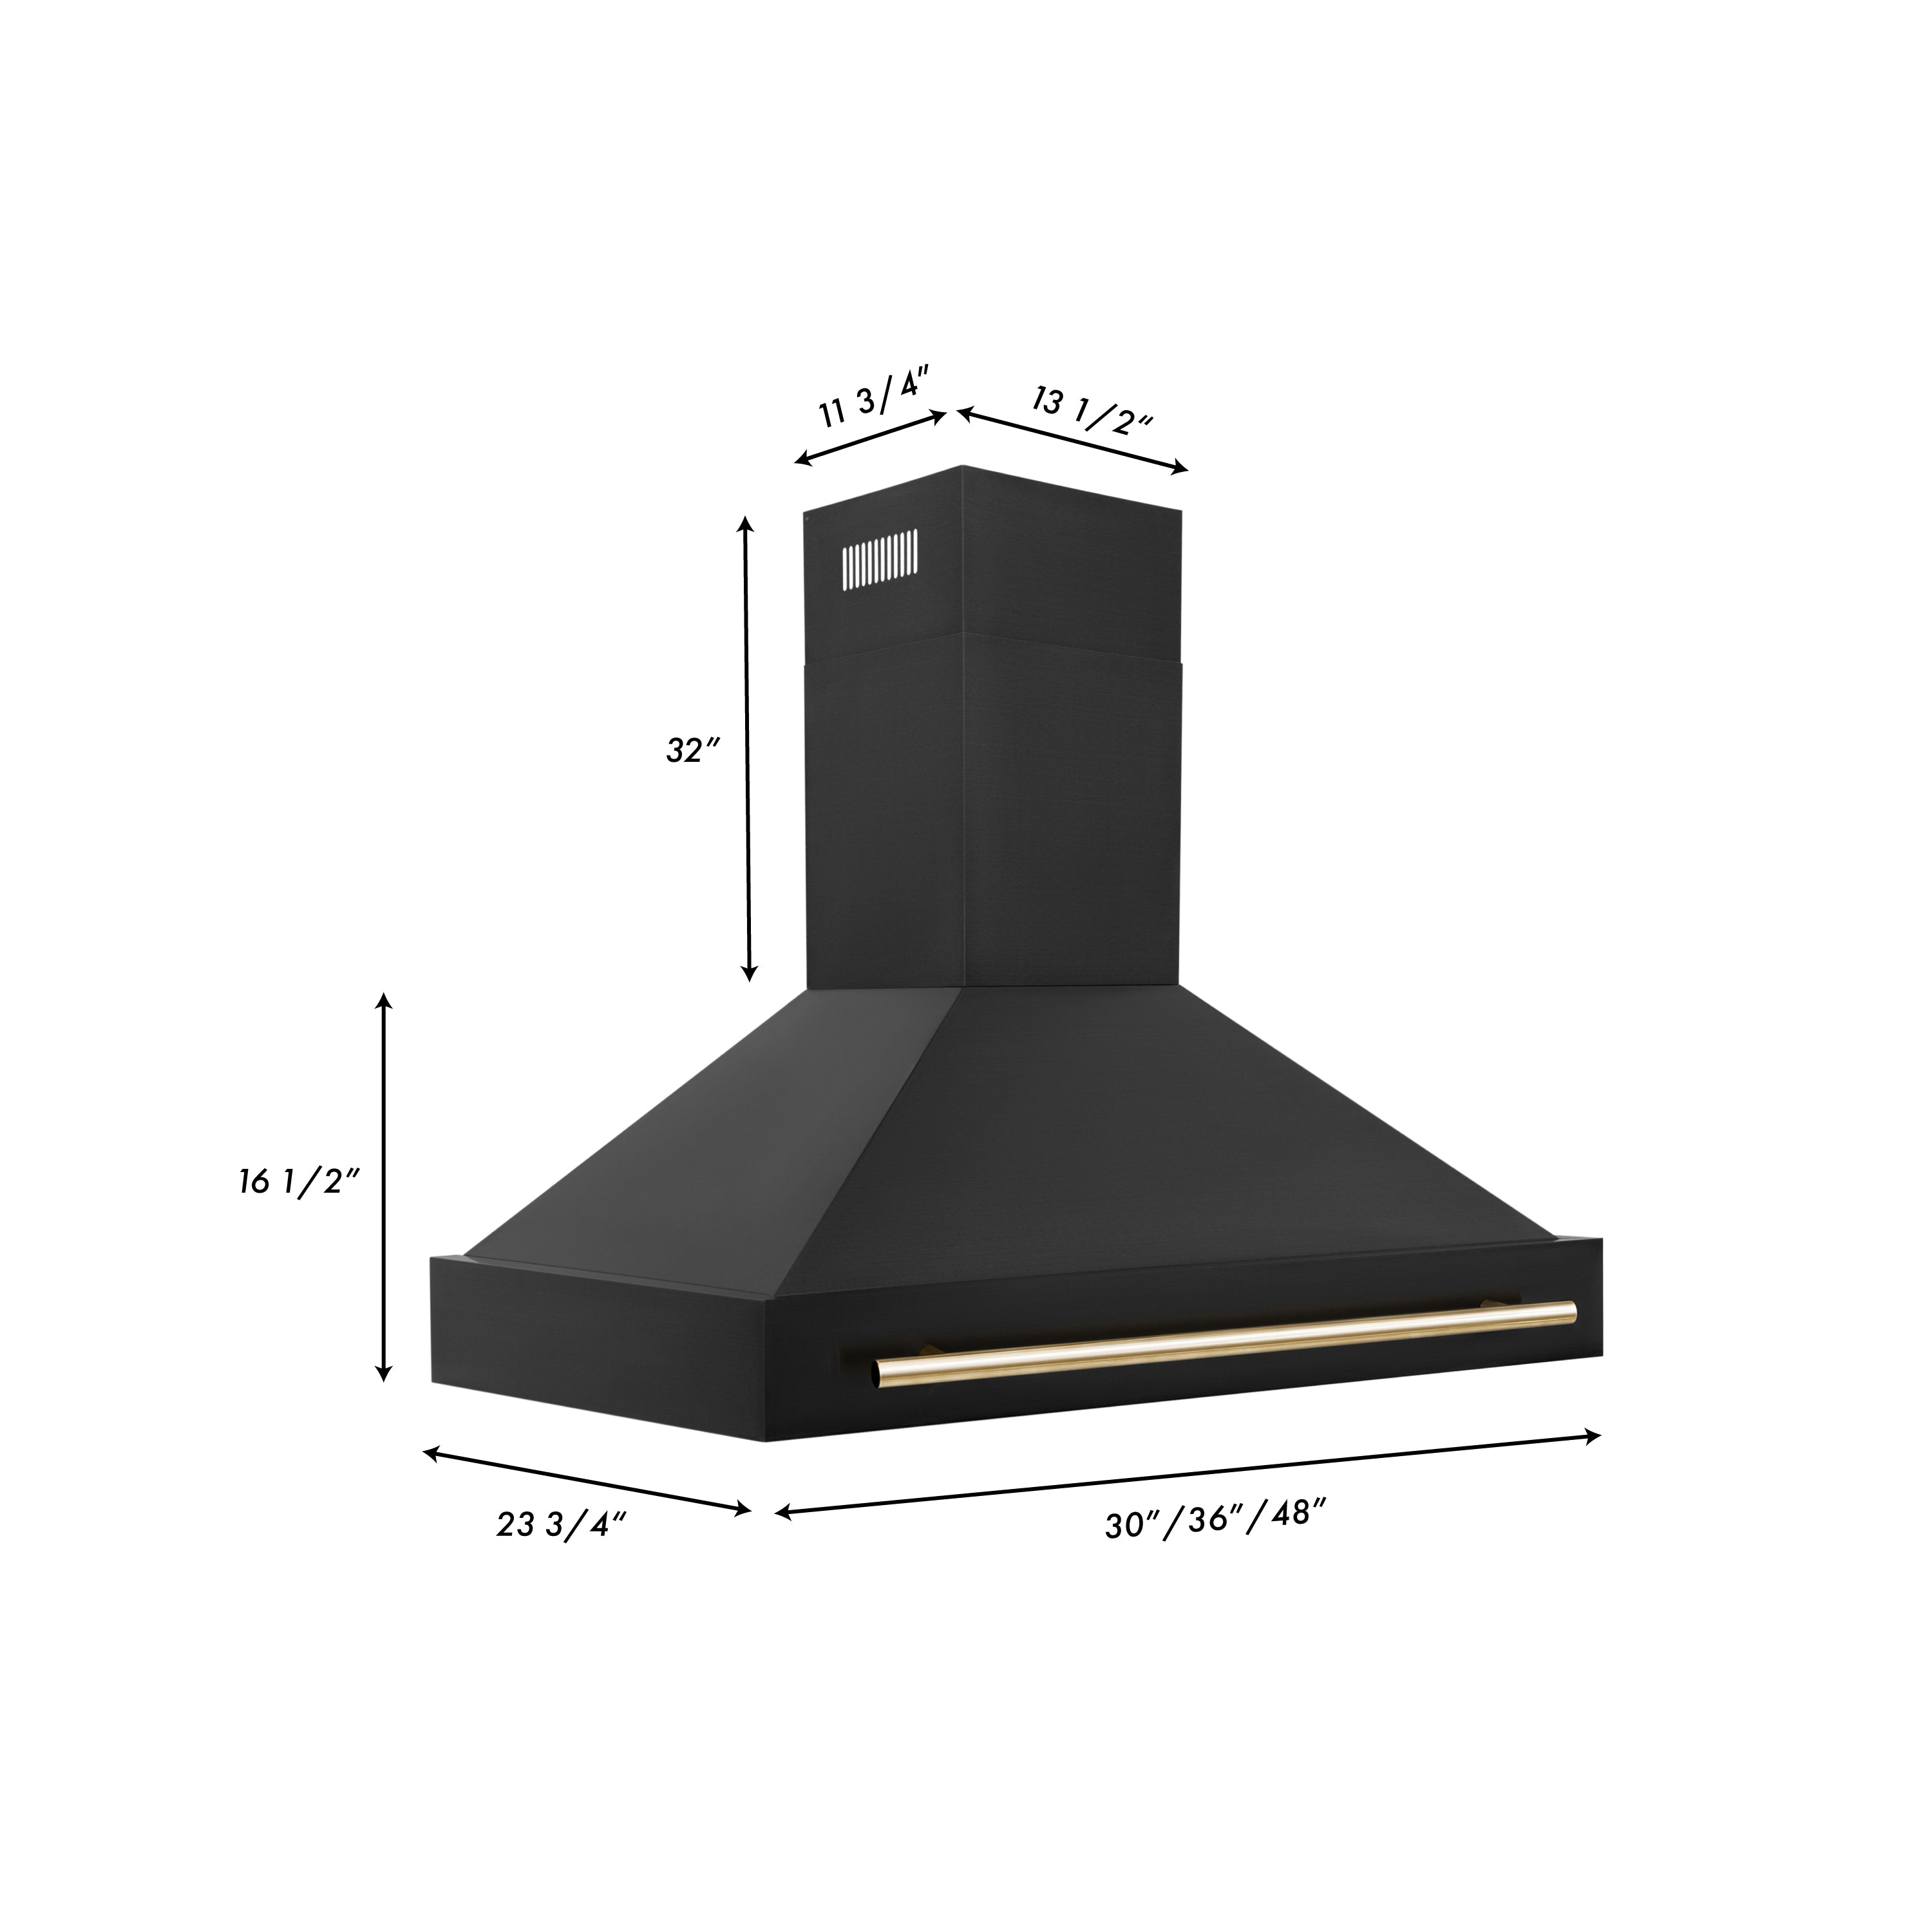 ZLINE Autograph Edition 48 in. Kitchen Package with Black Stainless Steel Dual Fuel Range, Range Hood and Dishwasher with Polished Gold Accents (3AKP-RABRHDWV48-G) dimensional diagram with measurements.